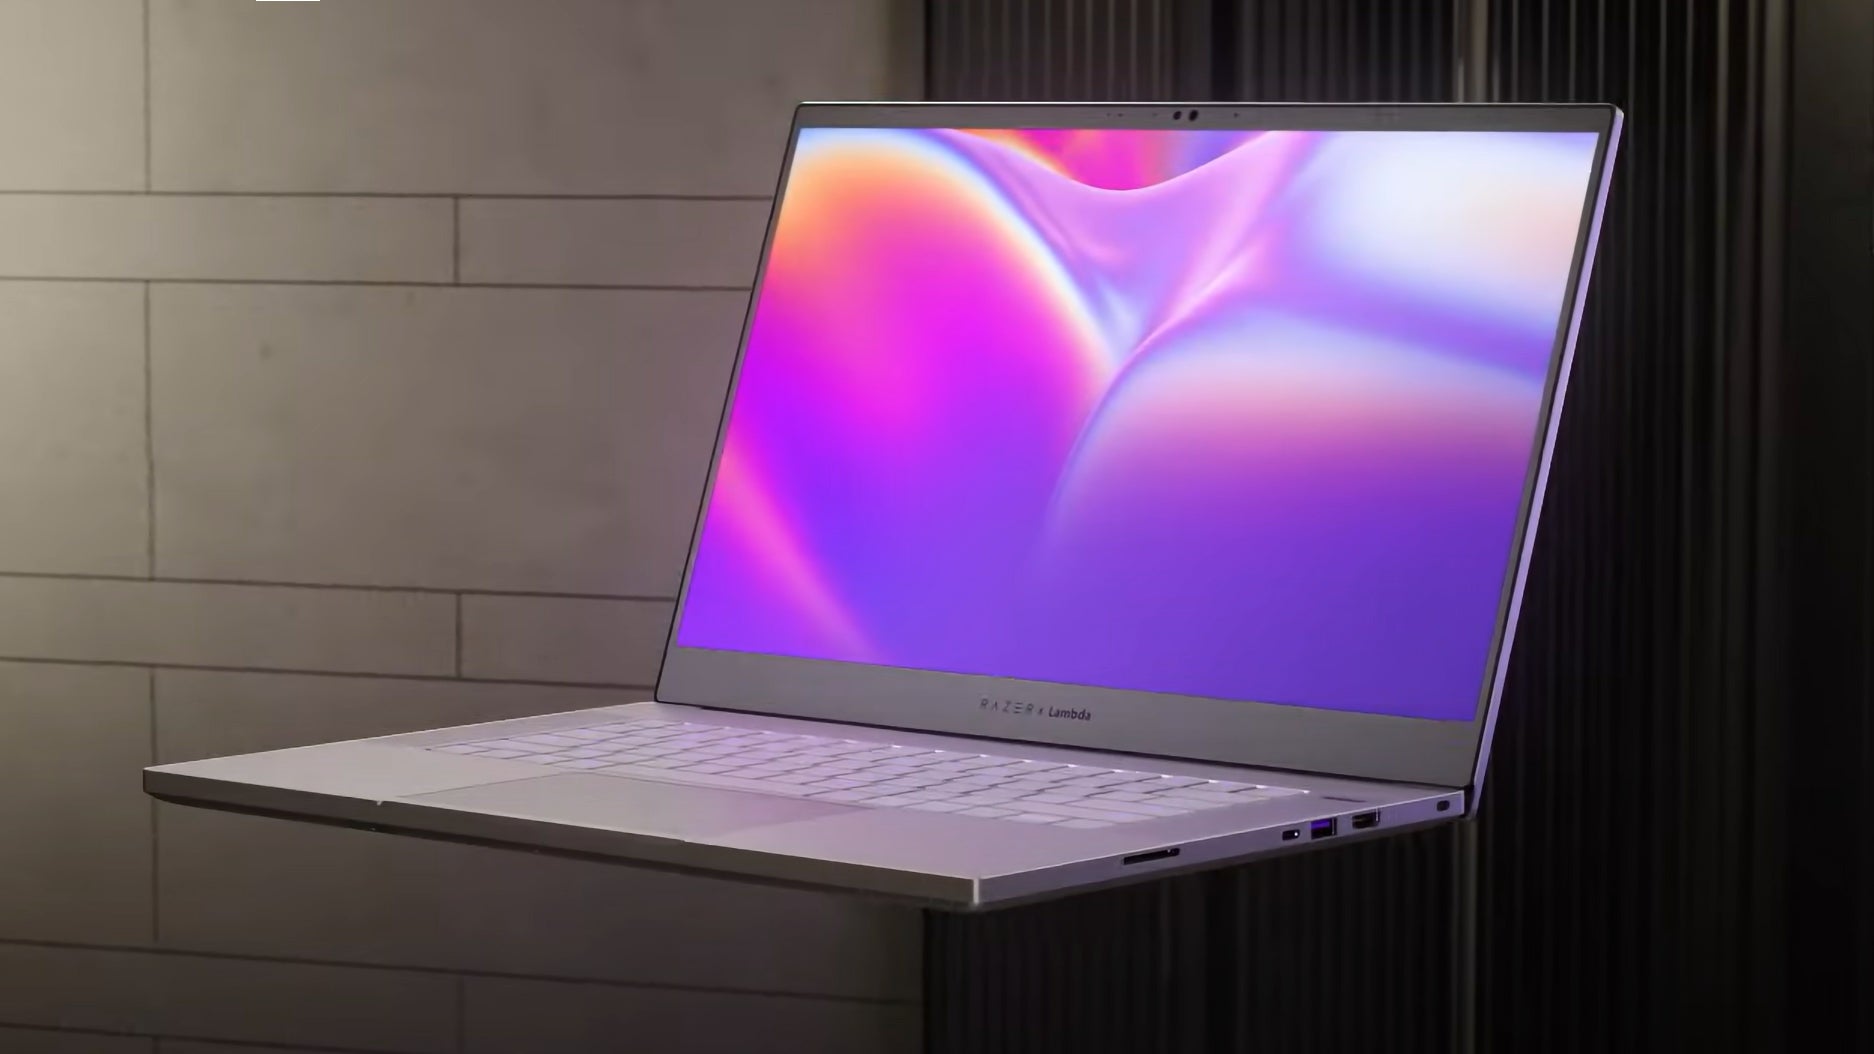 Razer's Pricey New Linux Laptop Is for Deepfakes Instead of Headshots